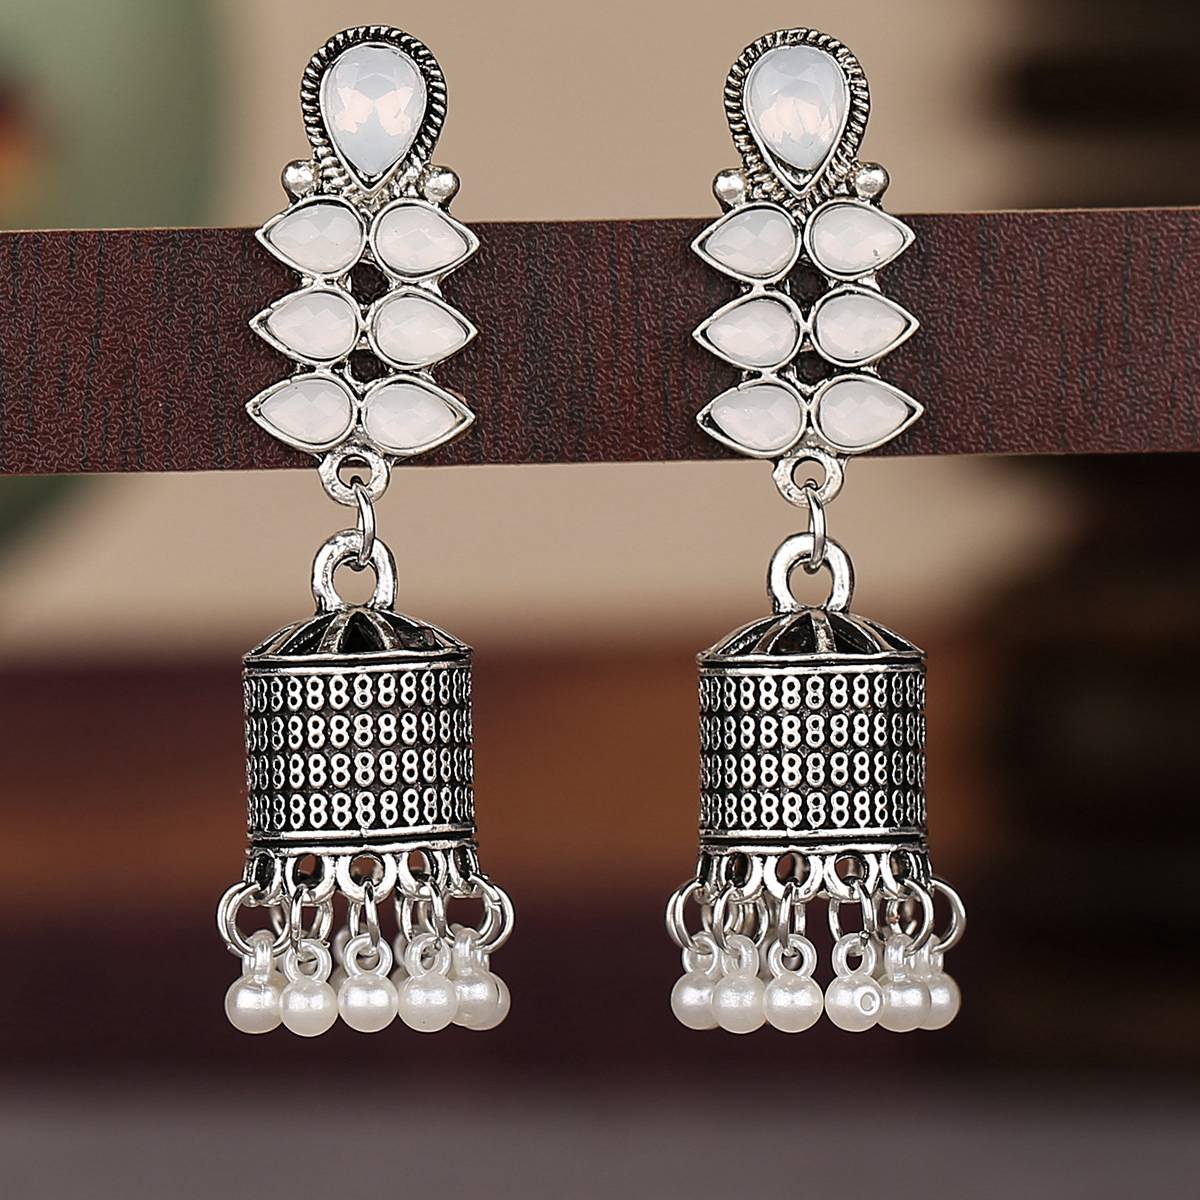 Ethnic-Silver-Color-Bell-Indian-Earrings-For-Women-Pendient-Vintage-Gyspy-CZ-Leaf-Ladies-Earring-Jew-1005003740209370-2